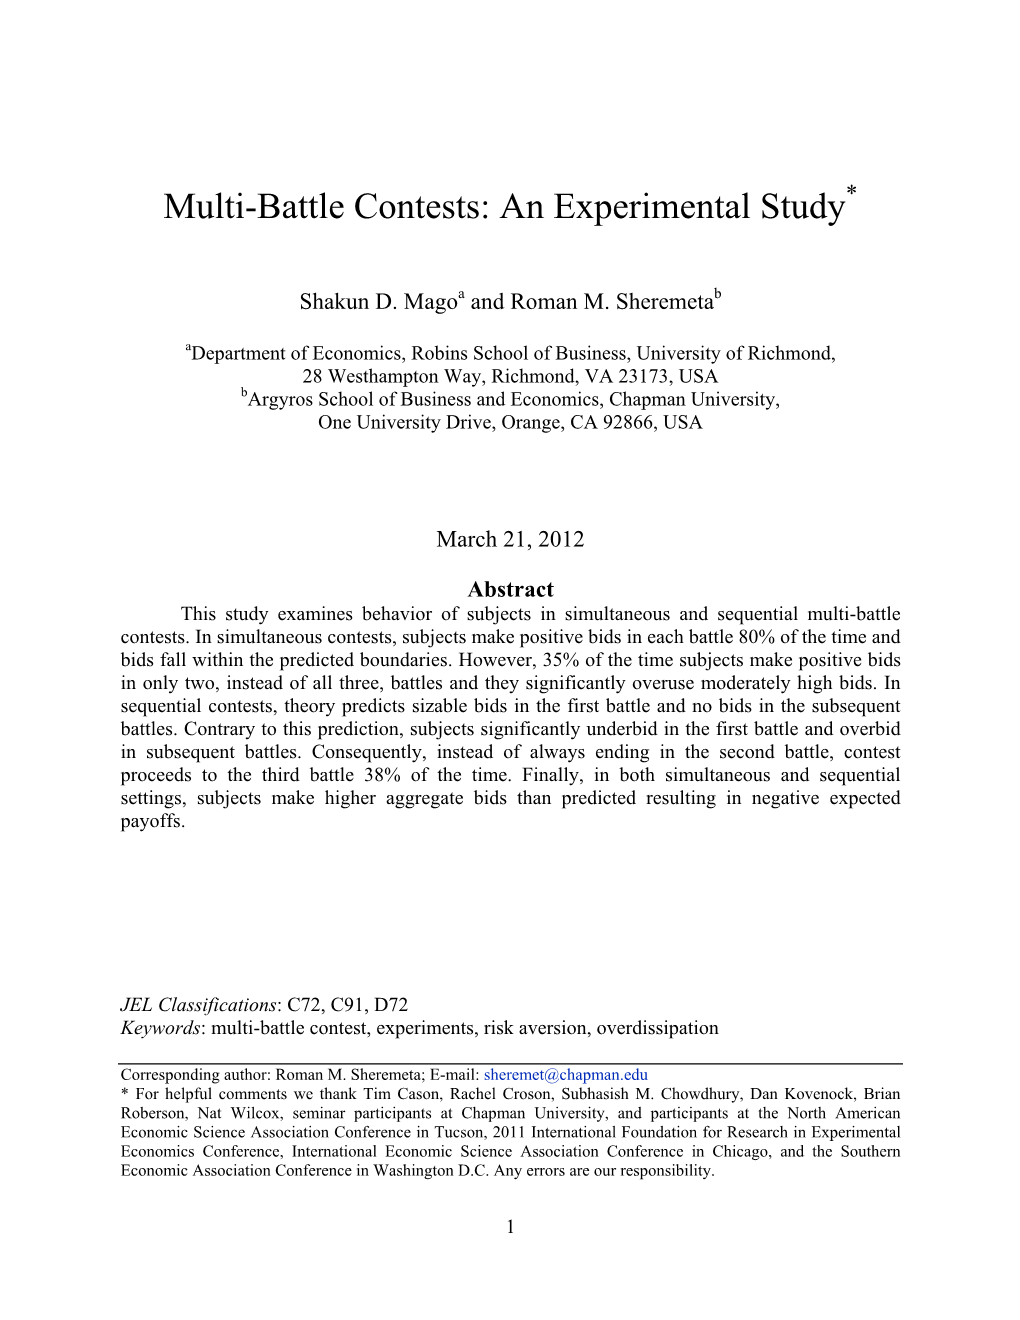 Multi-Battle Contests: an Experimental Study*